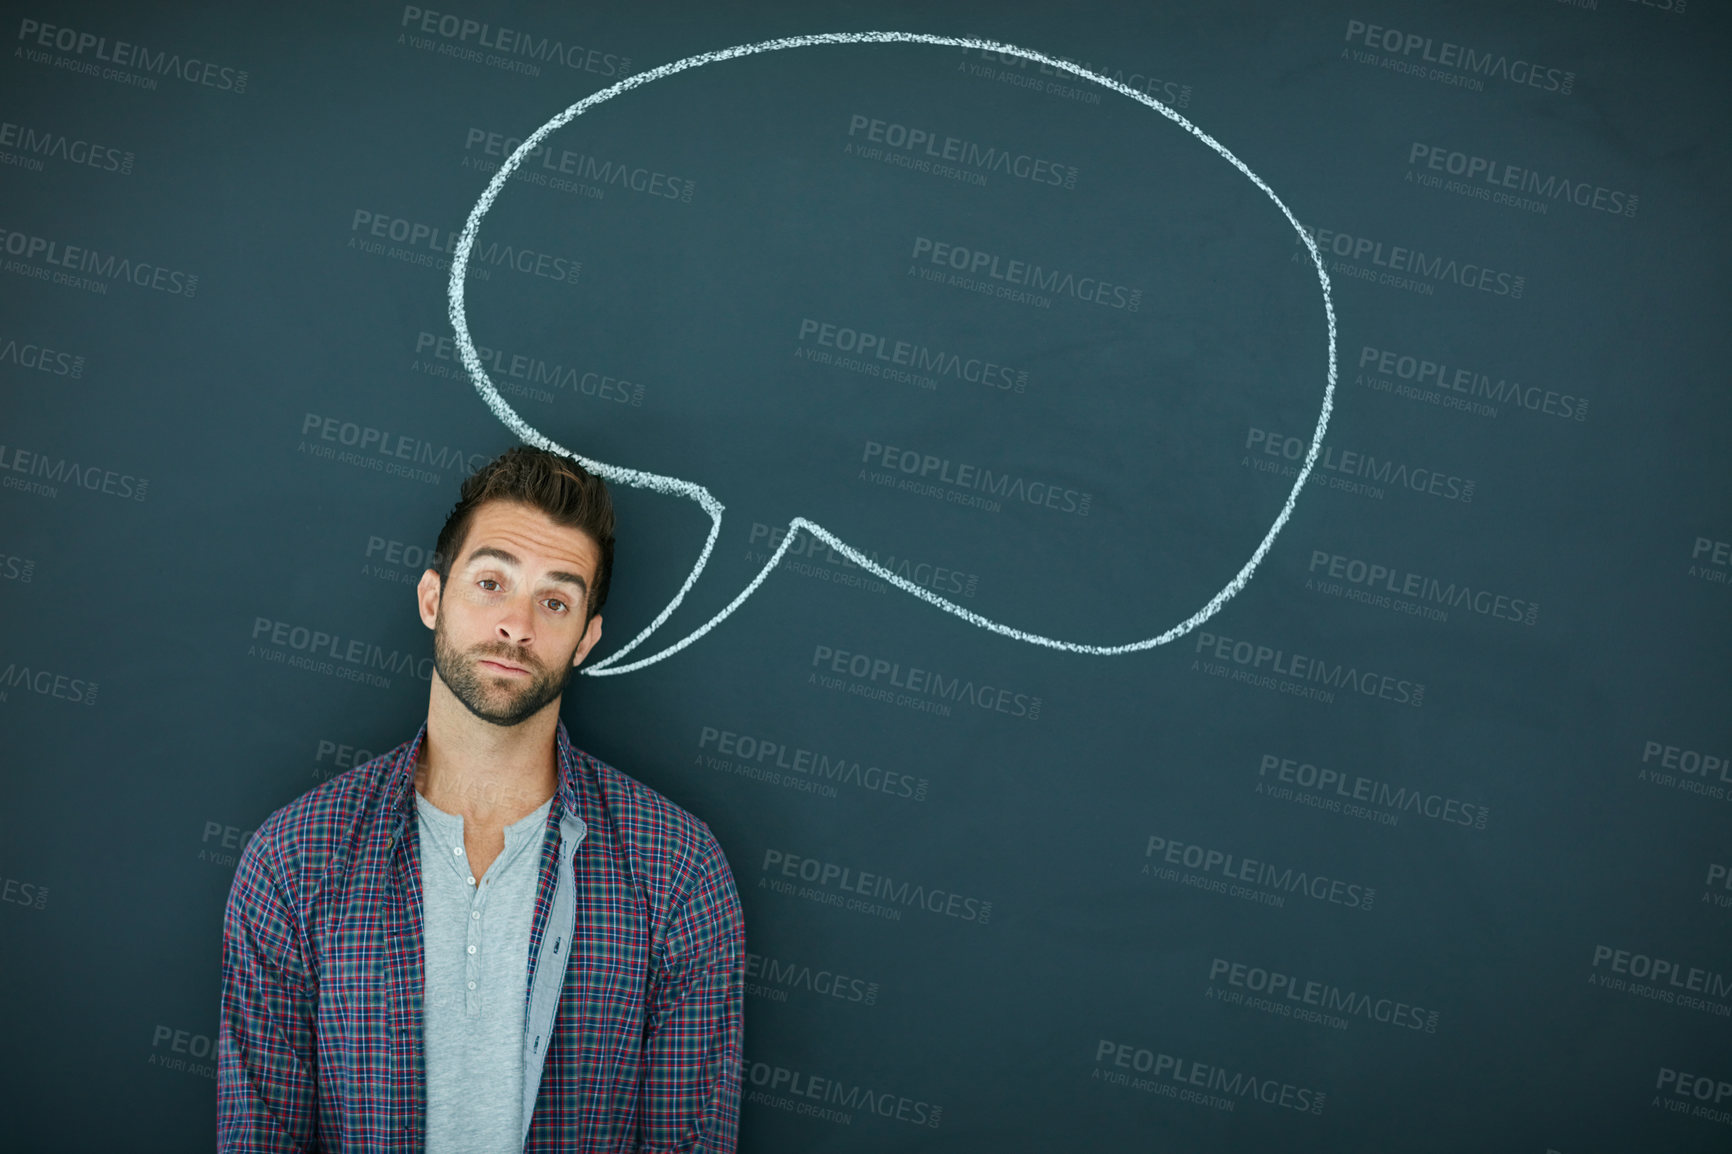 Buy stock photo Portrait of a young man standing in front of a blackboard with a speech bubble drawn on it